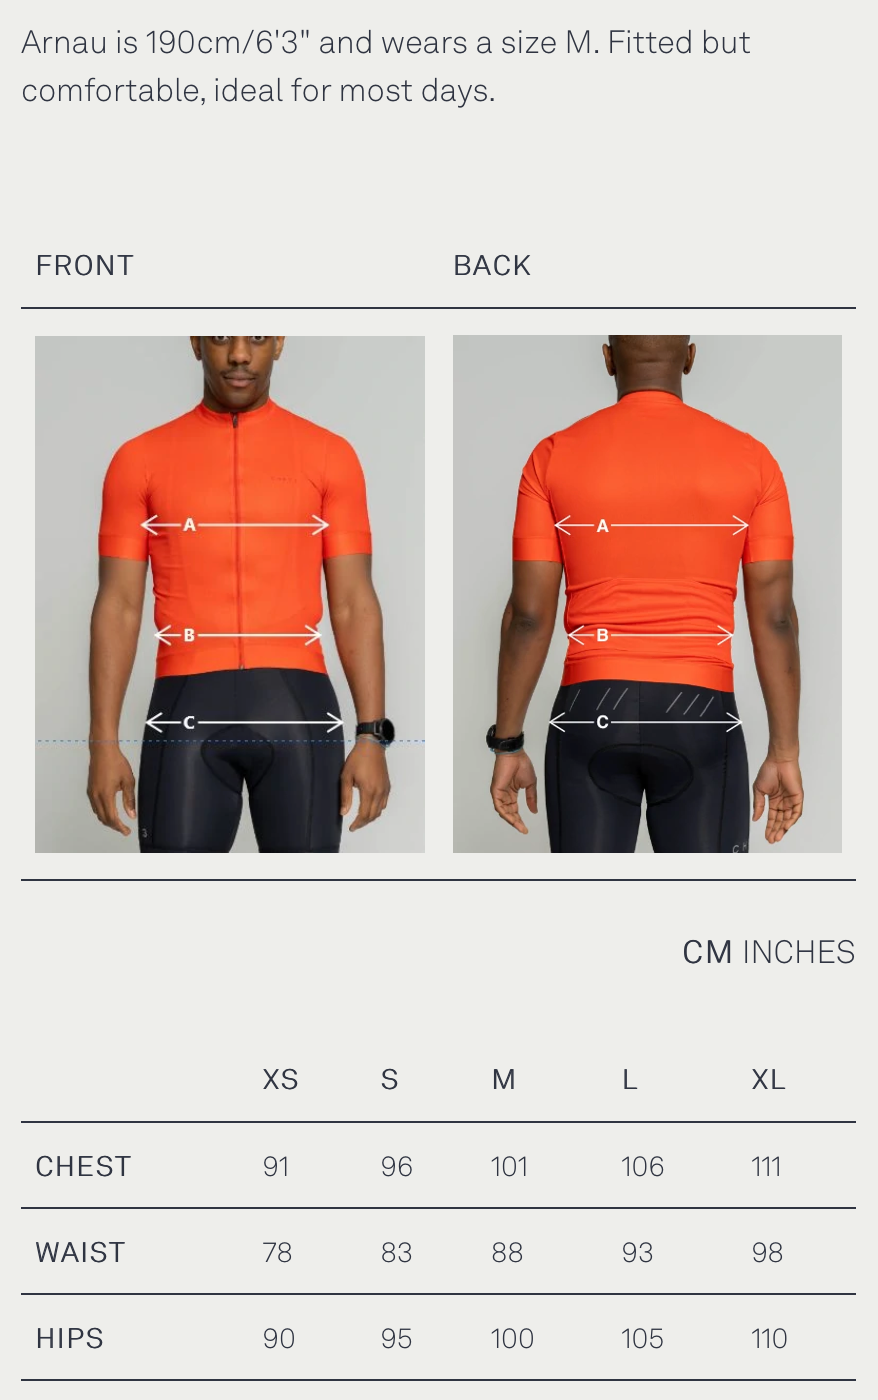 CHPT3 Most Days Performance Jersey - Carbon